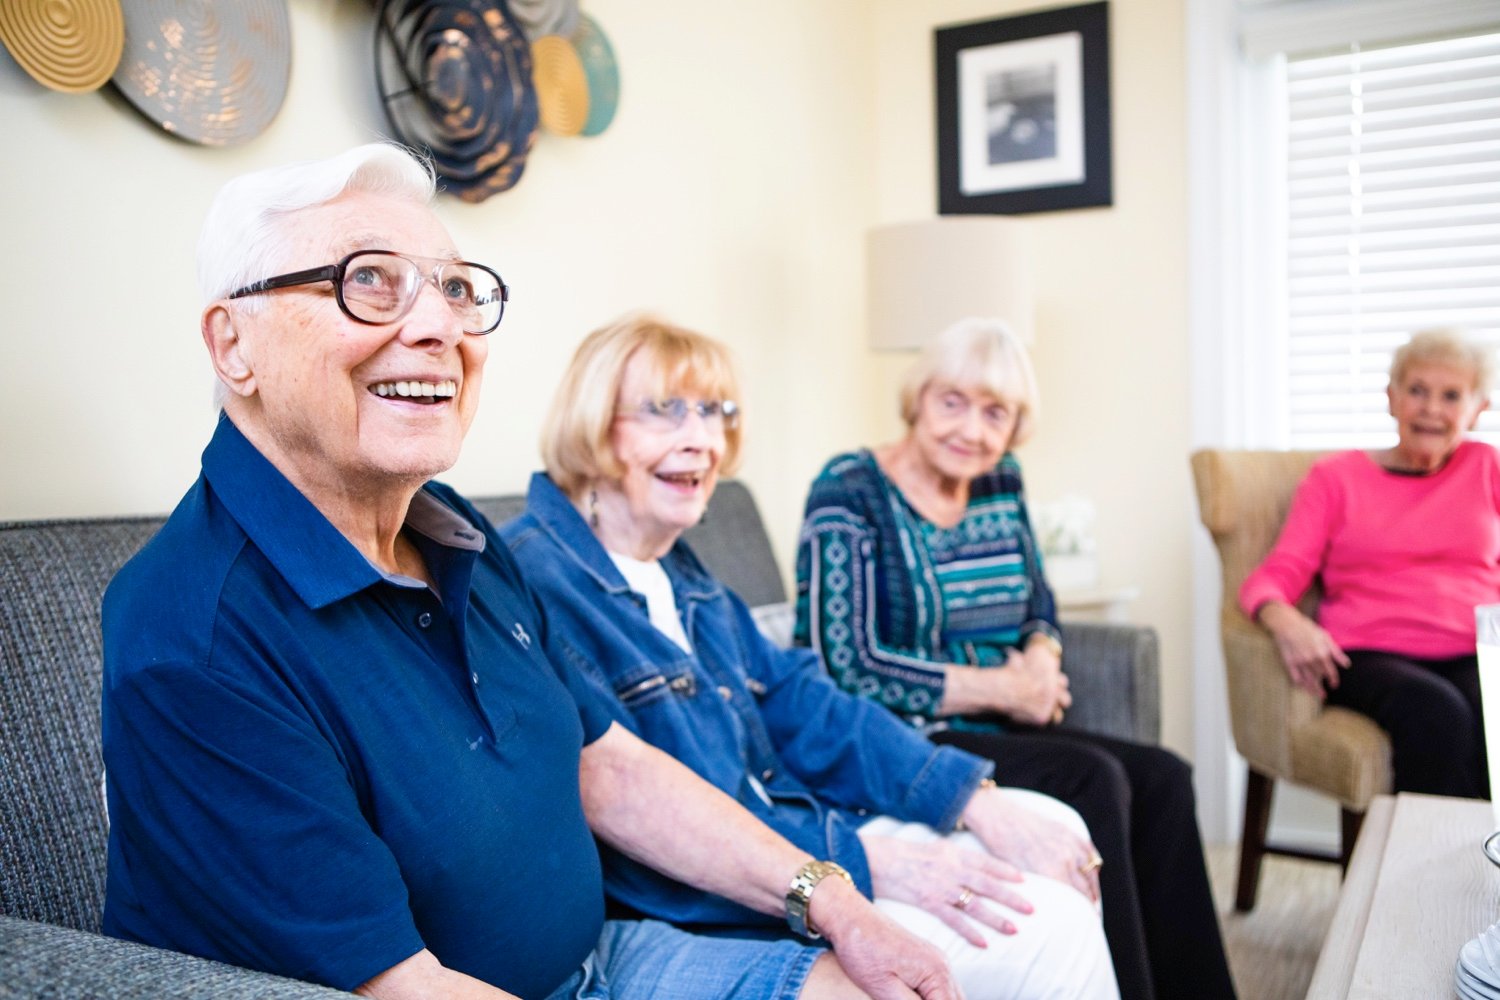 A group of seniors laughing and socalizing in a living room